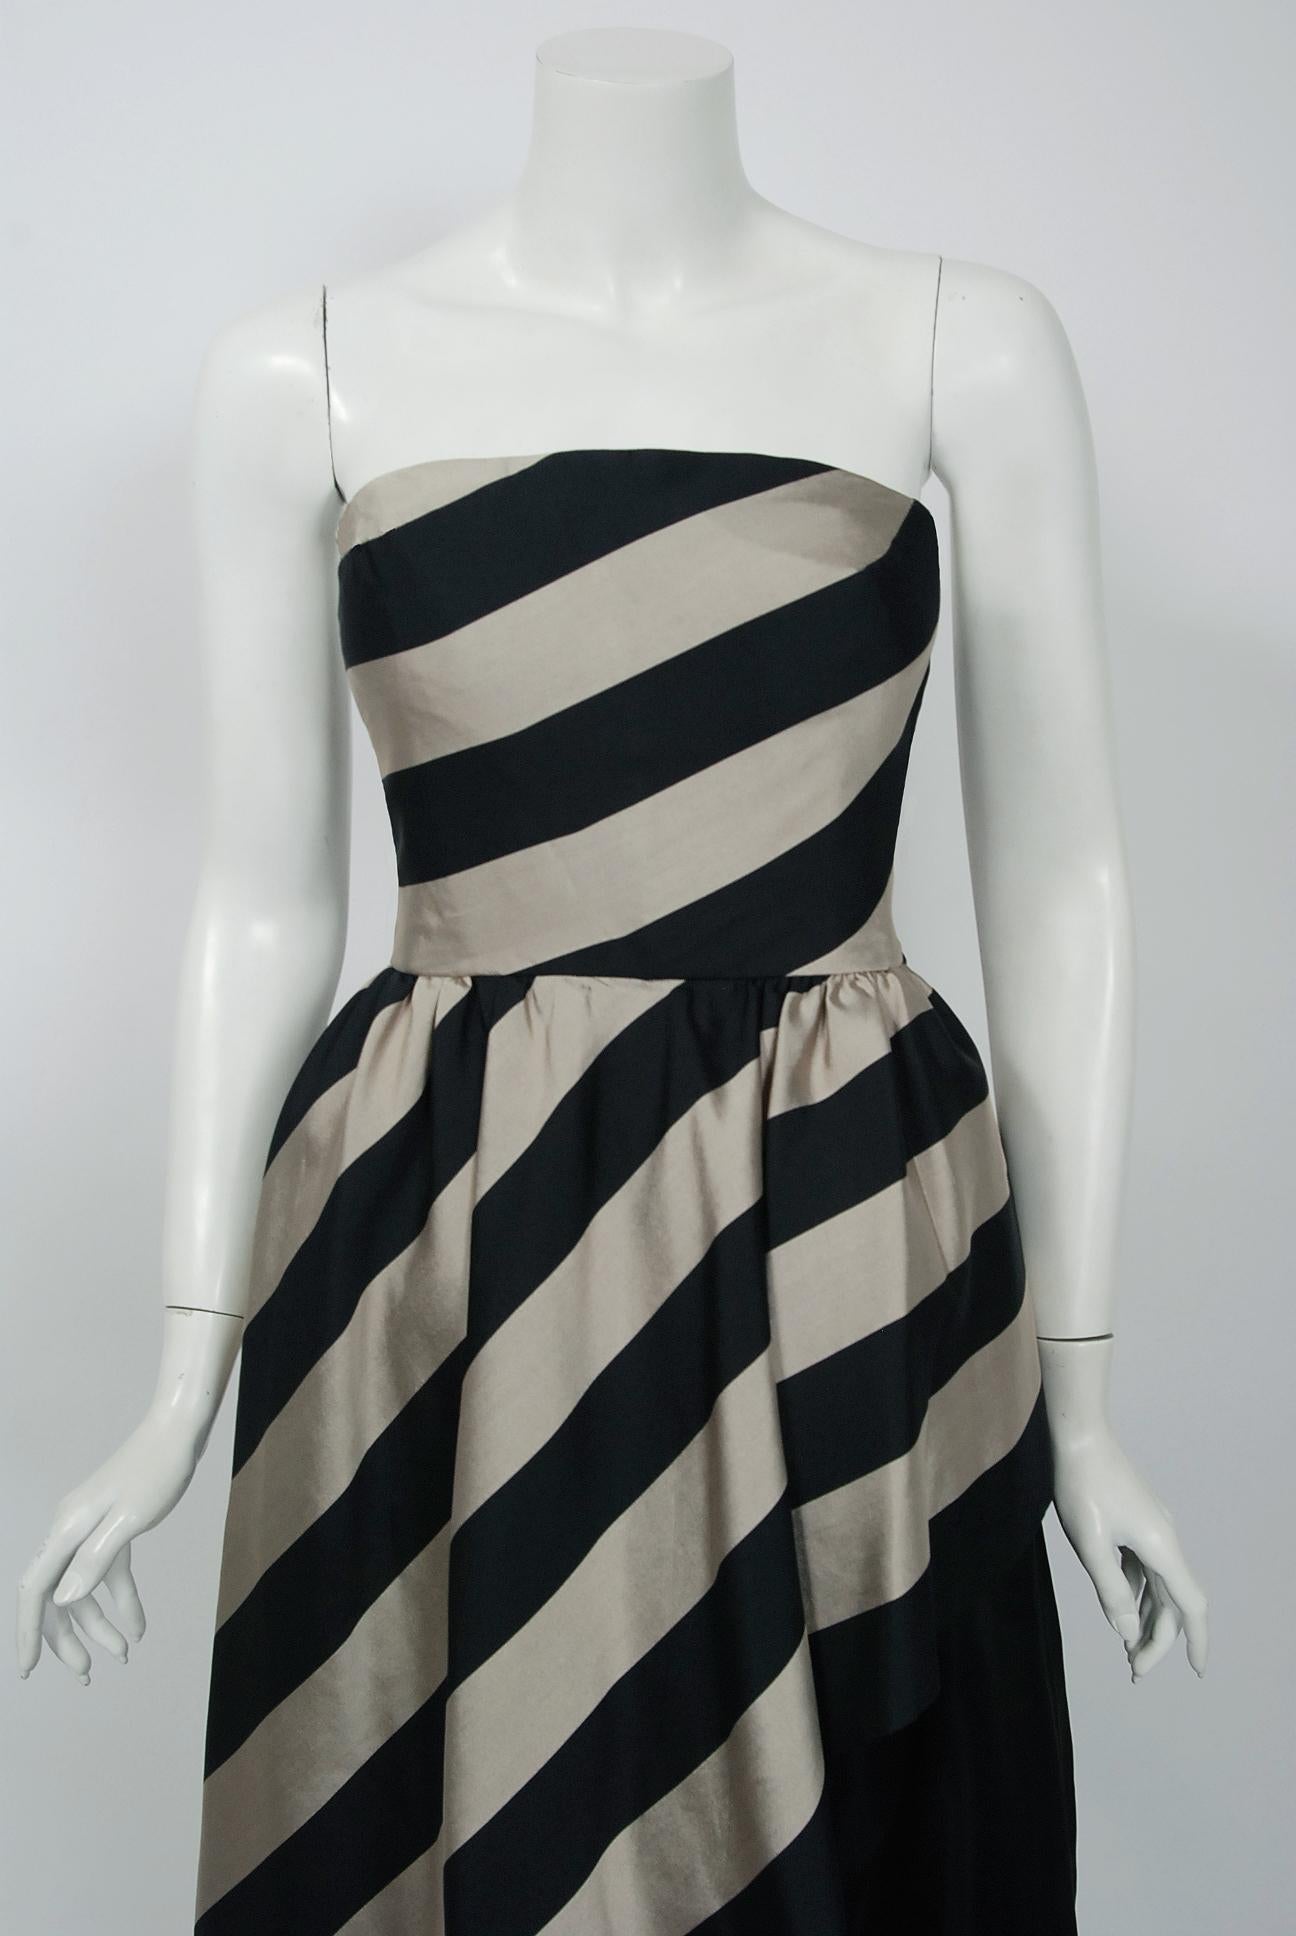 An amazing and highly stylized 1950's striped silk evening gown ensemble by Werle of Beverly Hills. Daniel Werle designed clothing for many Hollywood stars including Barbara Stanwyck, Marlo Thomas, Gloria Swanson and, most notably, many of the